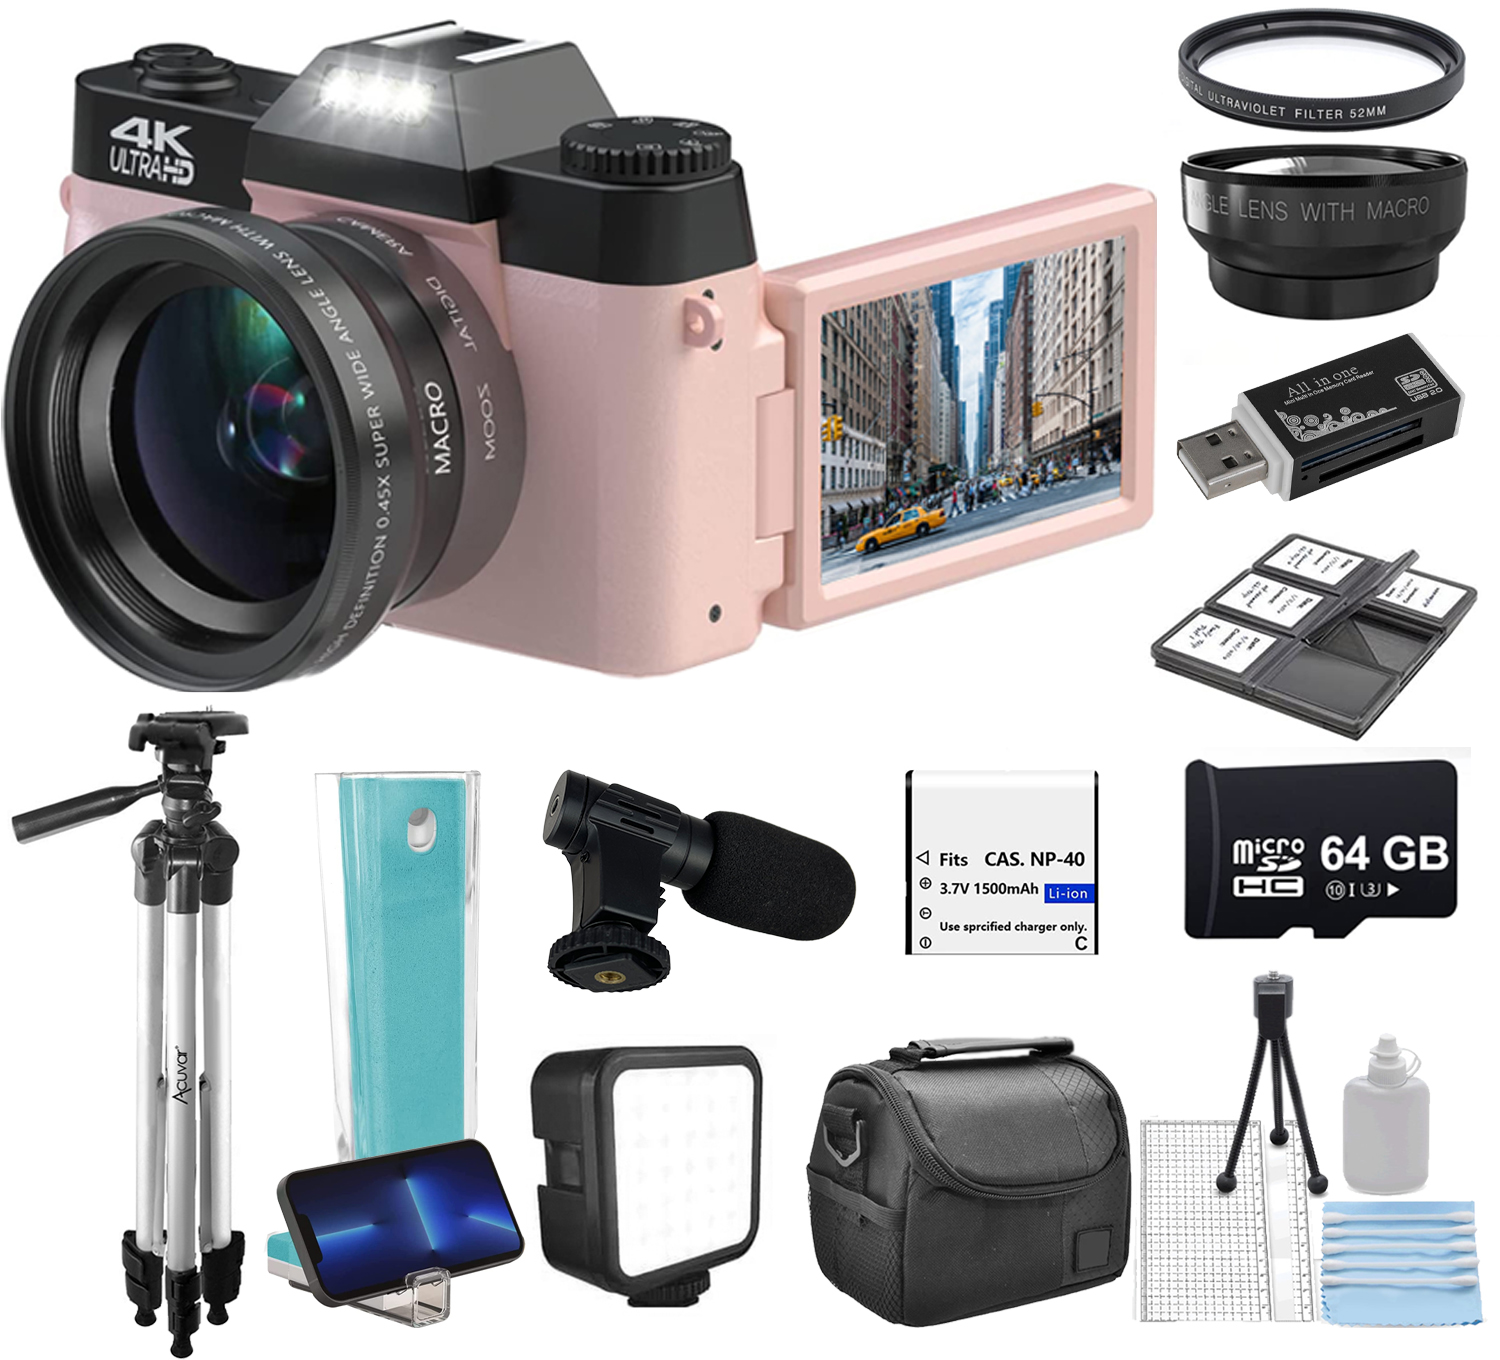 Acuvar 4K 48MP Digital Camera Kit for Photography, Vlogging Camera for YouTube with Flip Screen, WiFi, Wide Angle & Macro Lens, 64GB Micro SD Card, 50" Tripod, Case, Card Reader, Microphone, LED - image 1 of 9